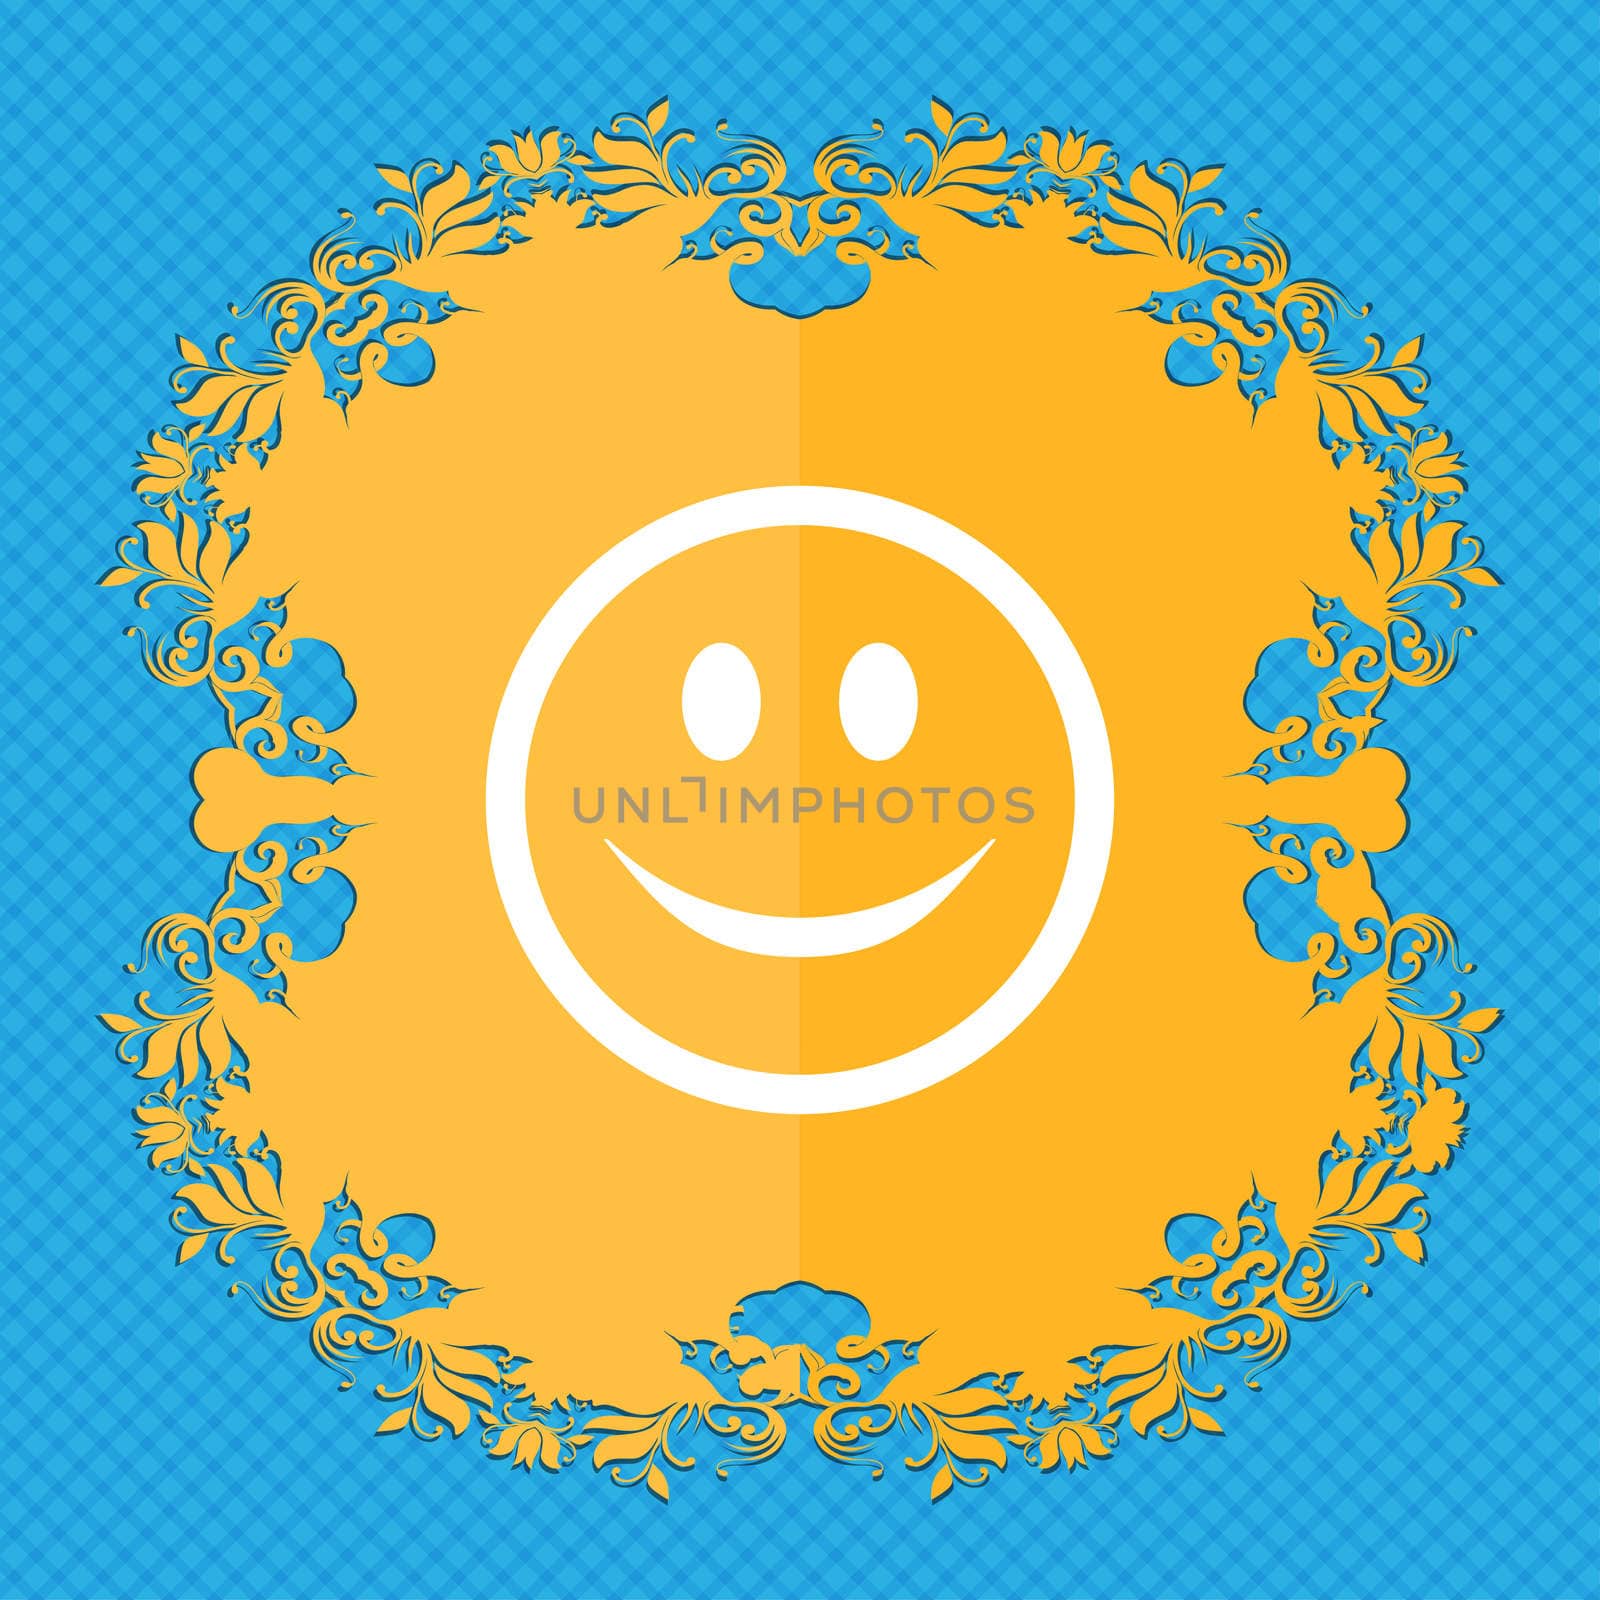 Smile, Happy face . Floral flat design on a blue abstract background with place for your text. illustration